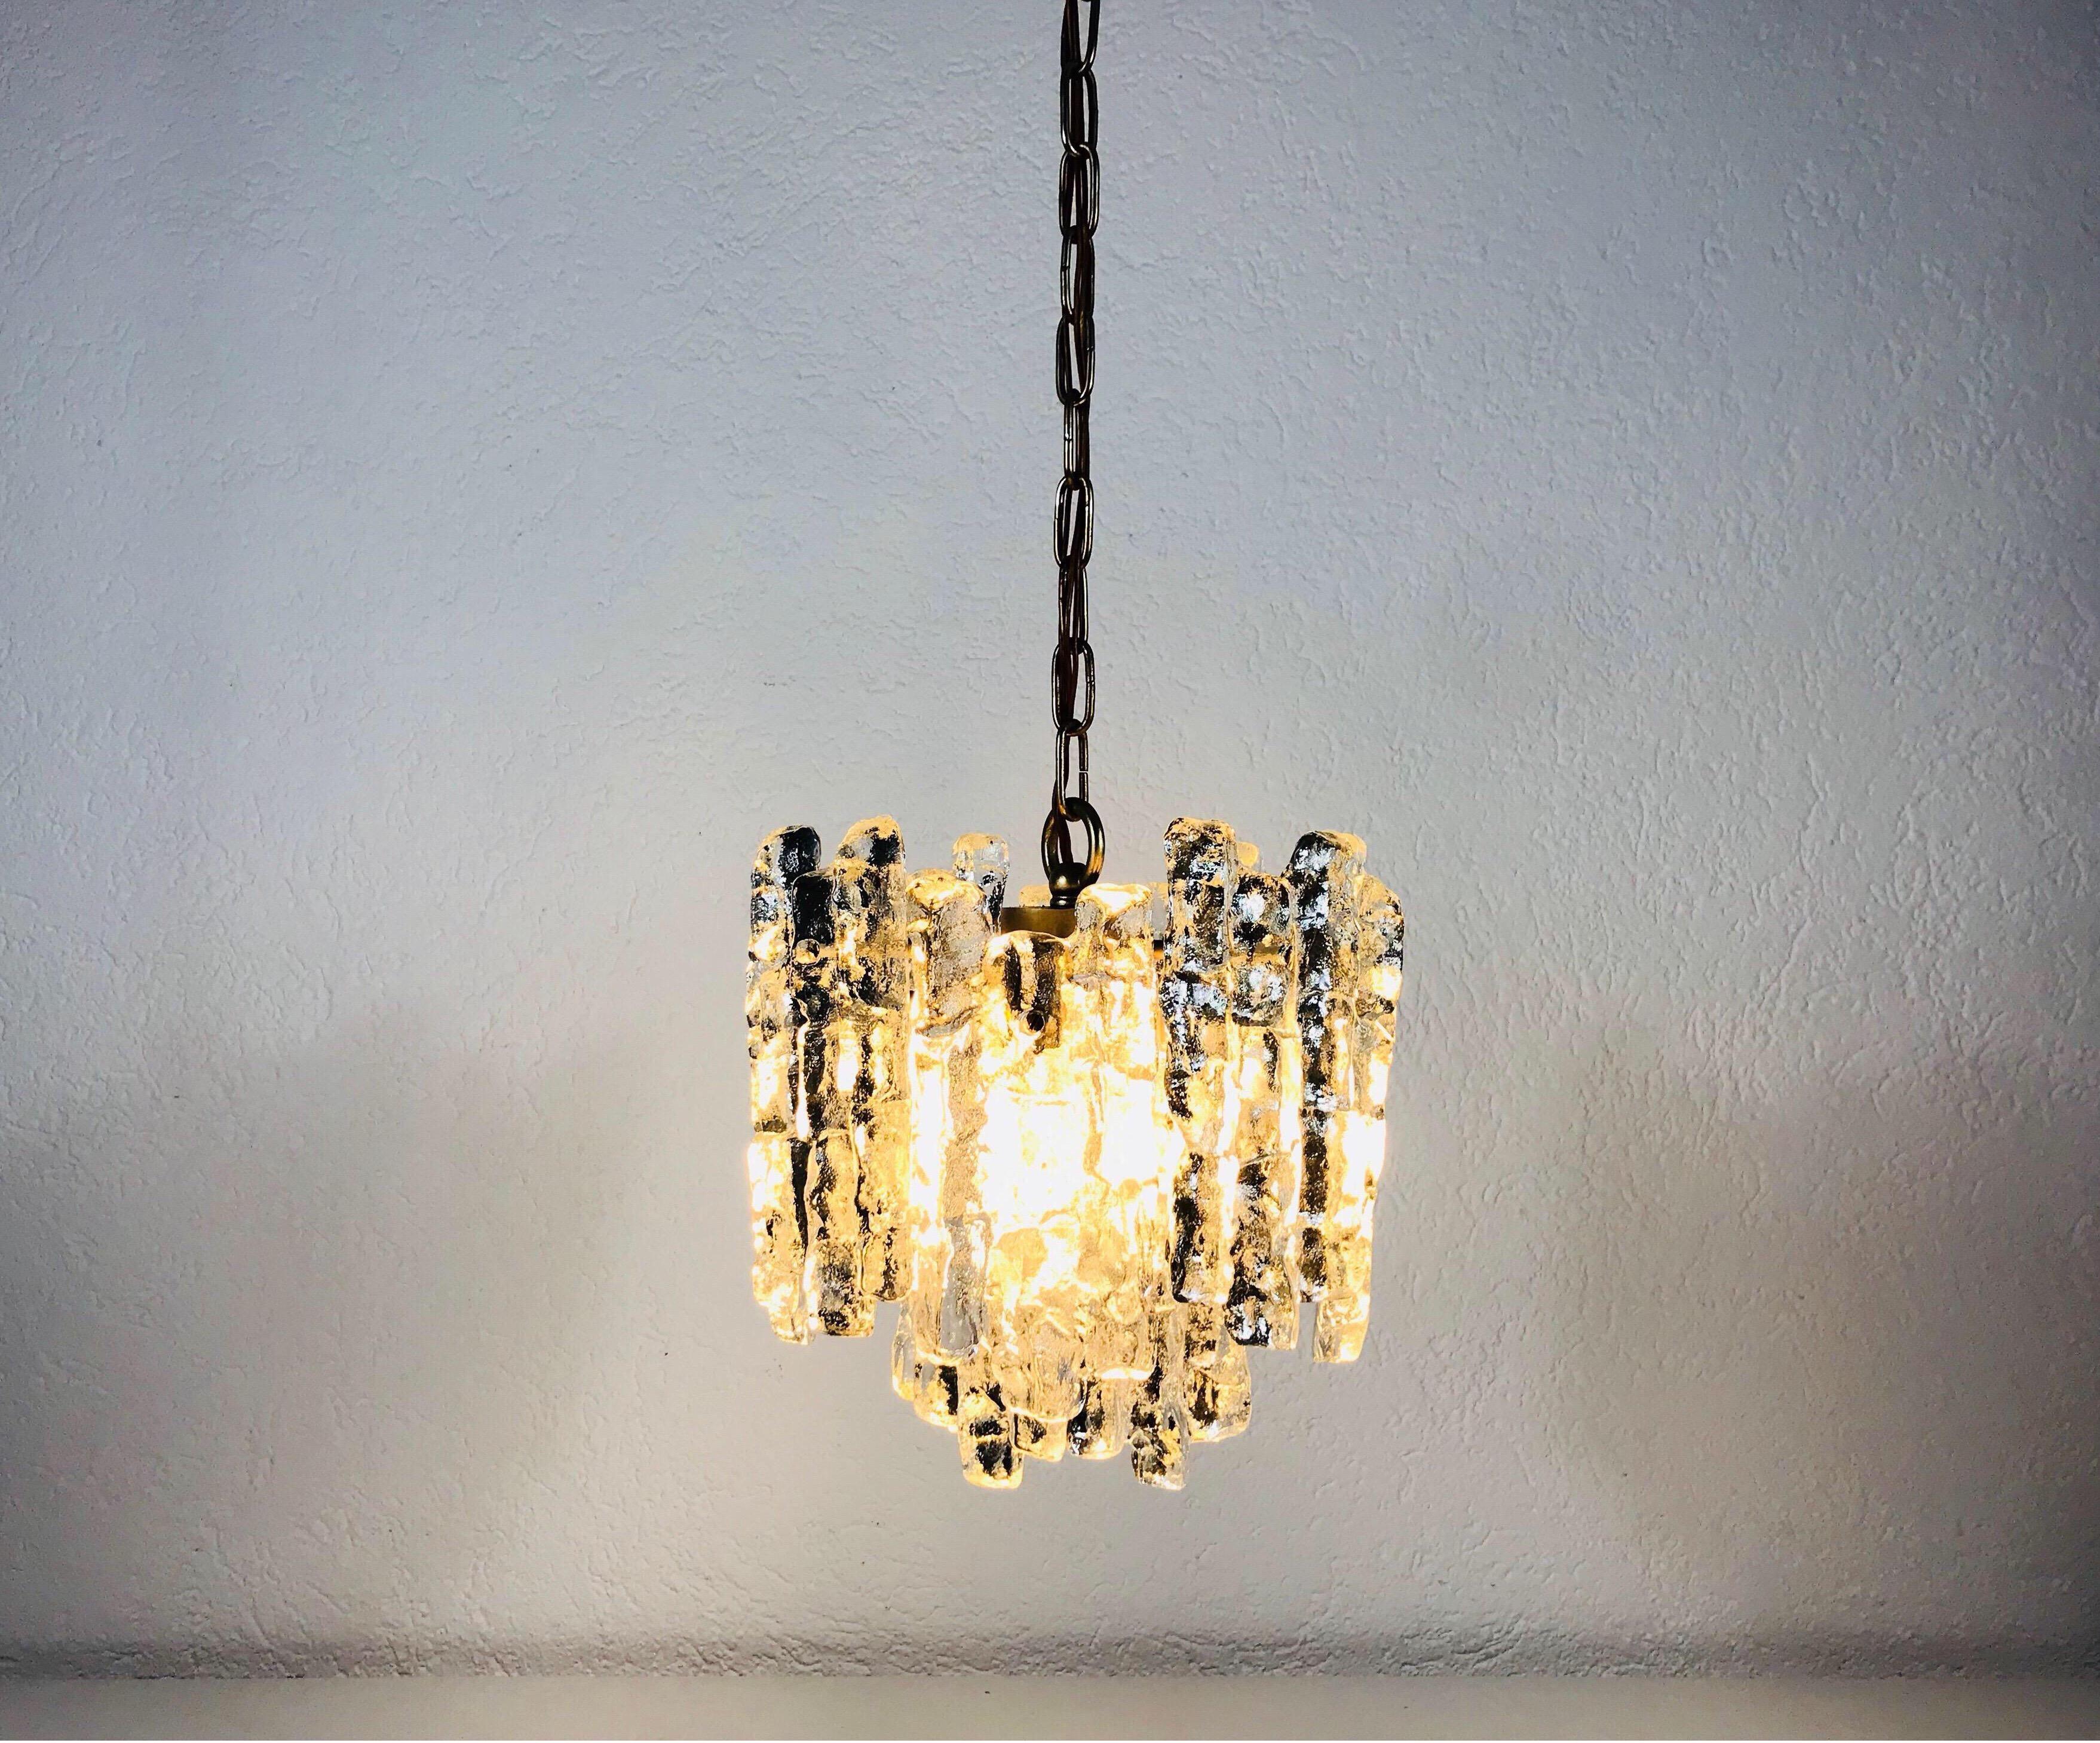 Midcentury Ice Crystal Glass Pendant Light or Chandelier by Kalmar, circa 1960s For Sale 2